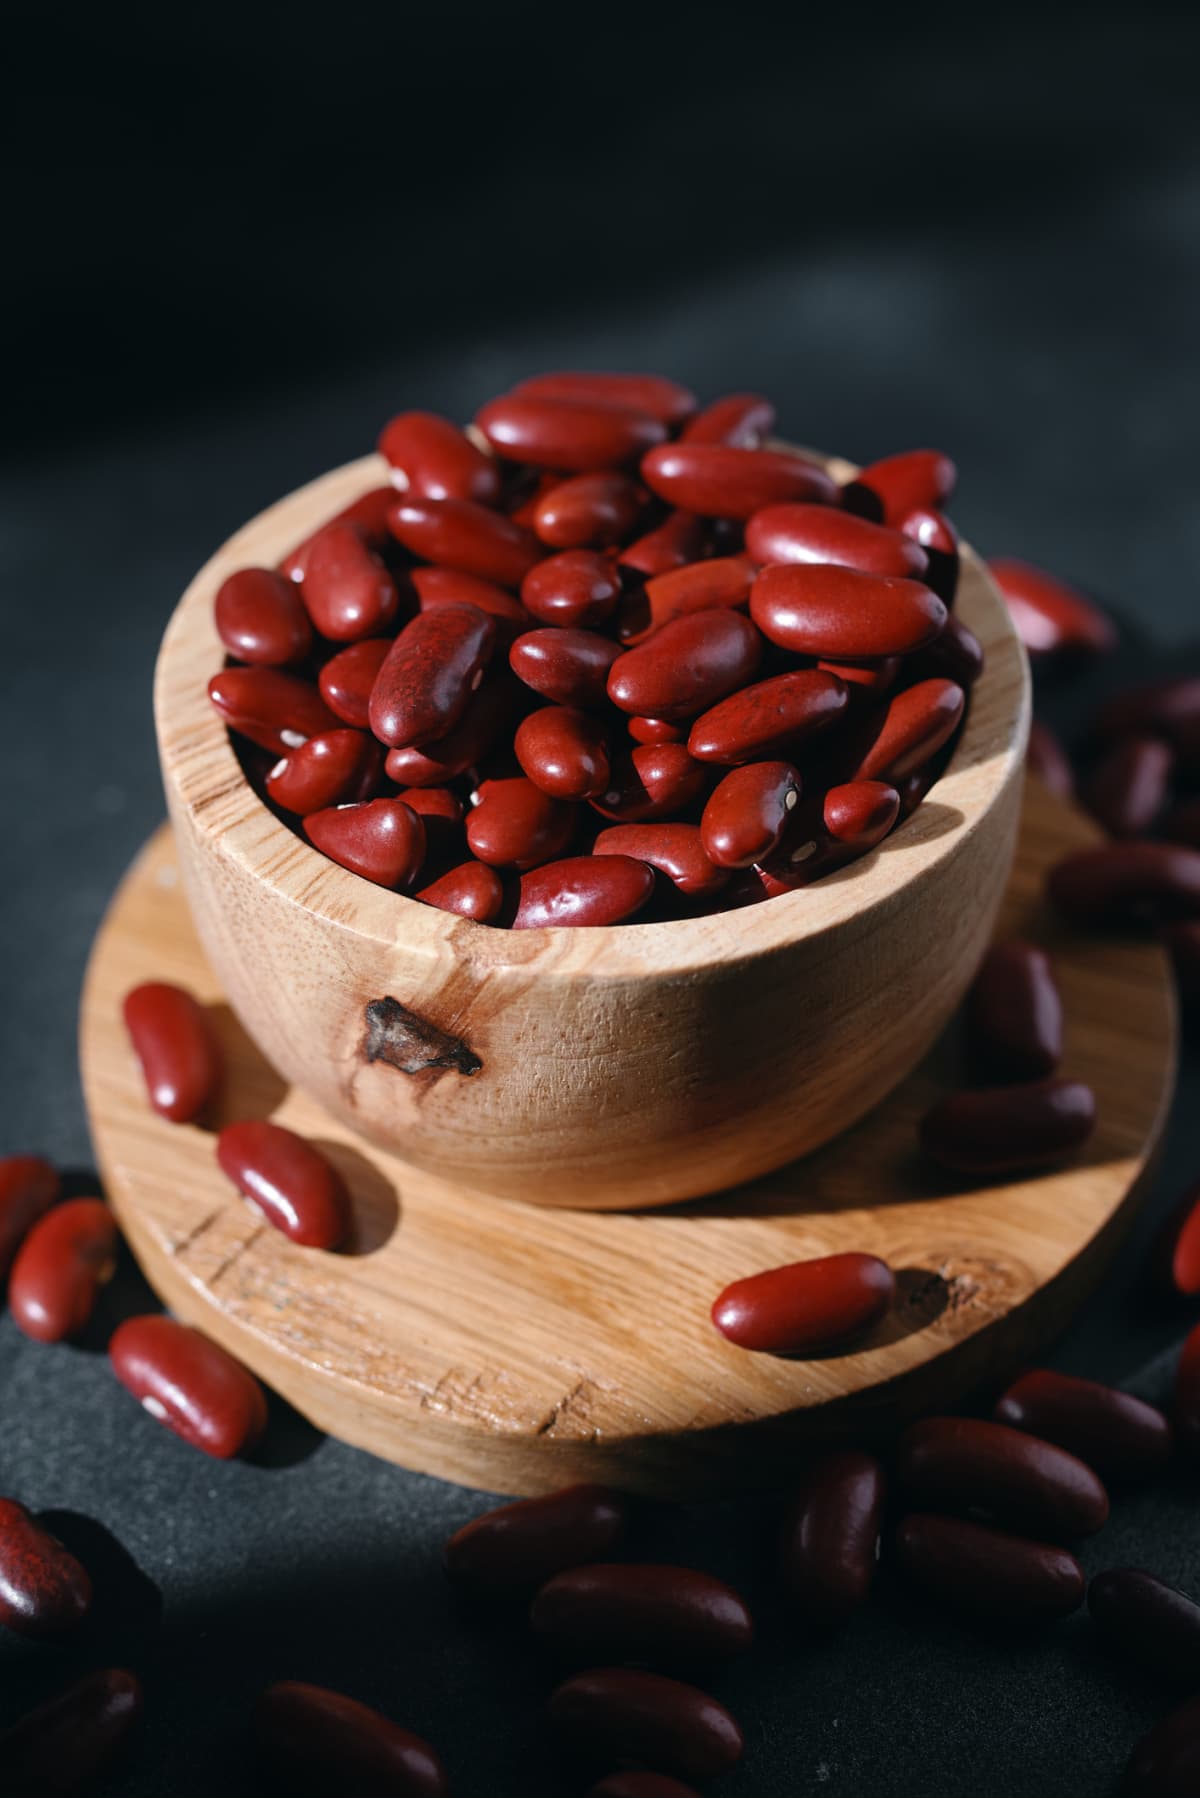 The kidney beans in the wooden cup